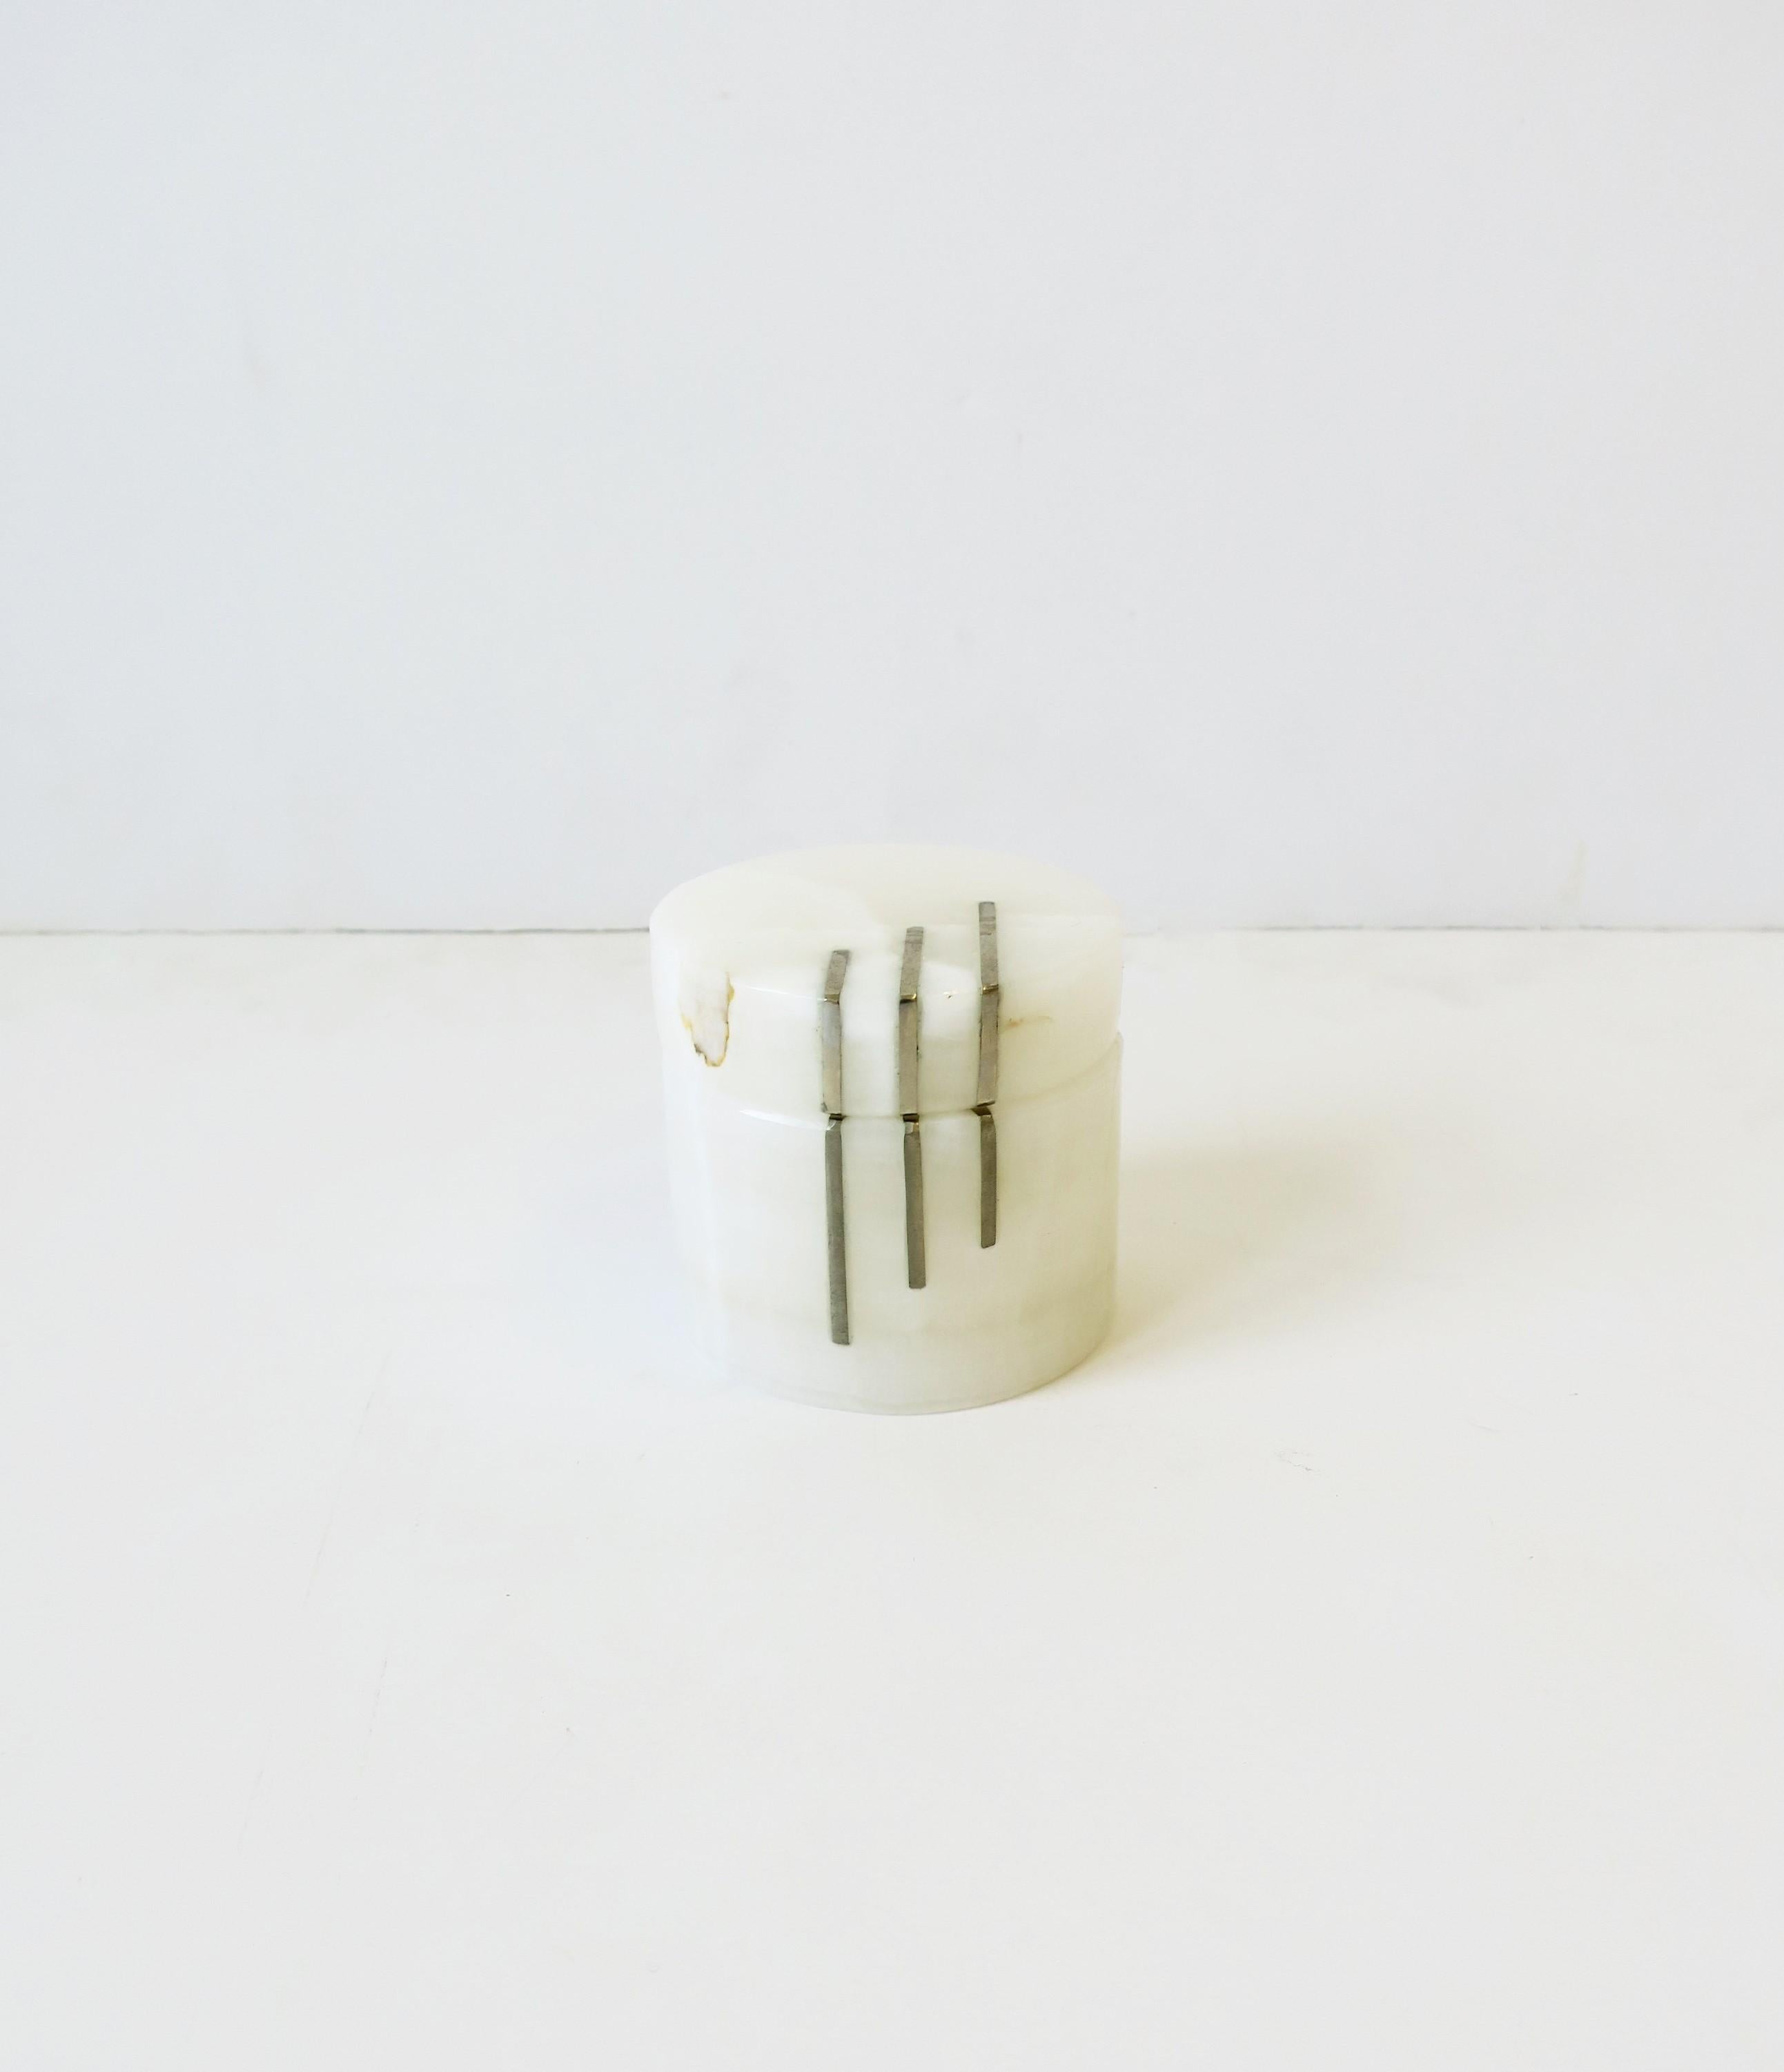 A small Postmodern white onyx marble box with steel metal detail, circa late-20th century, Italy. Onyx is predominantly white with traces of neutral hues as shown in images. A great piece to hold small jewelry or items on a desk, vanity, nightstand,